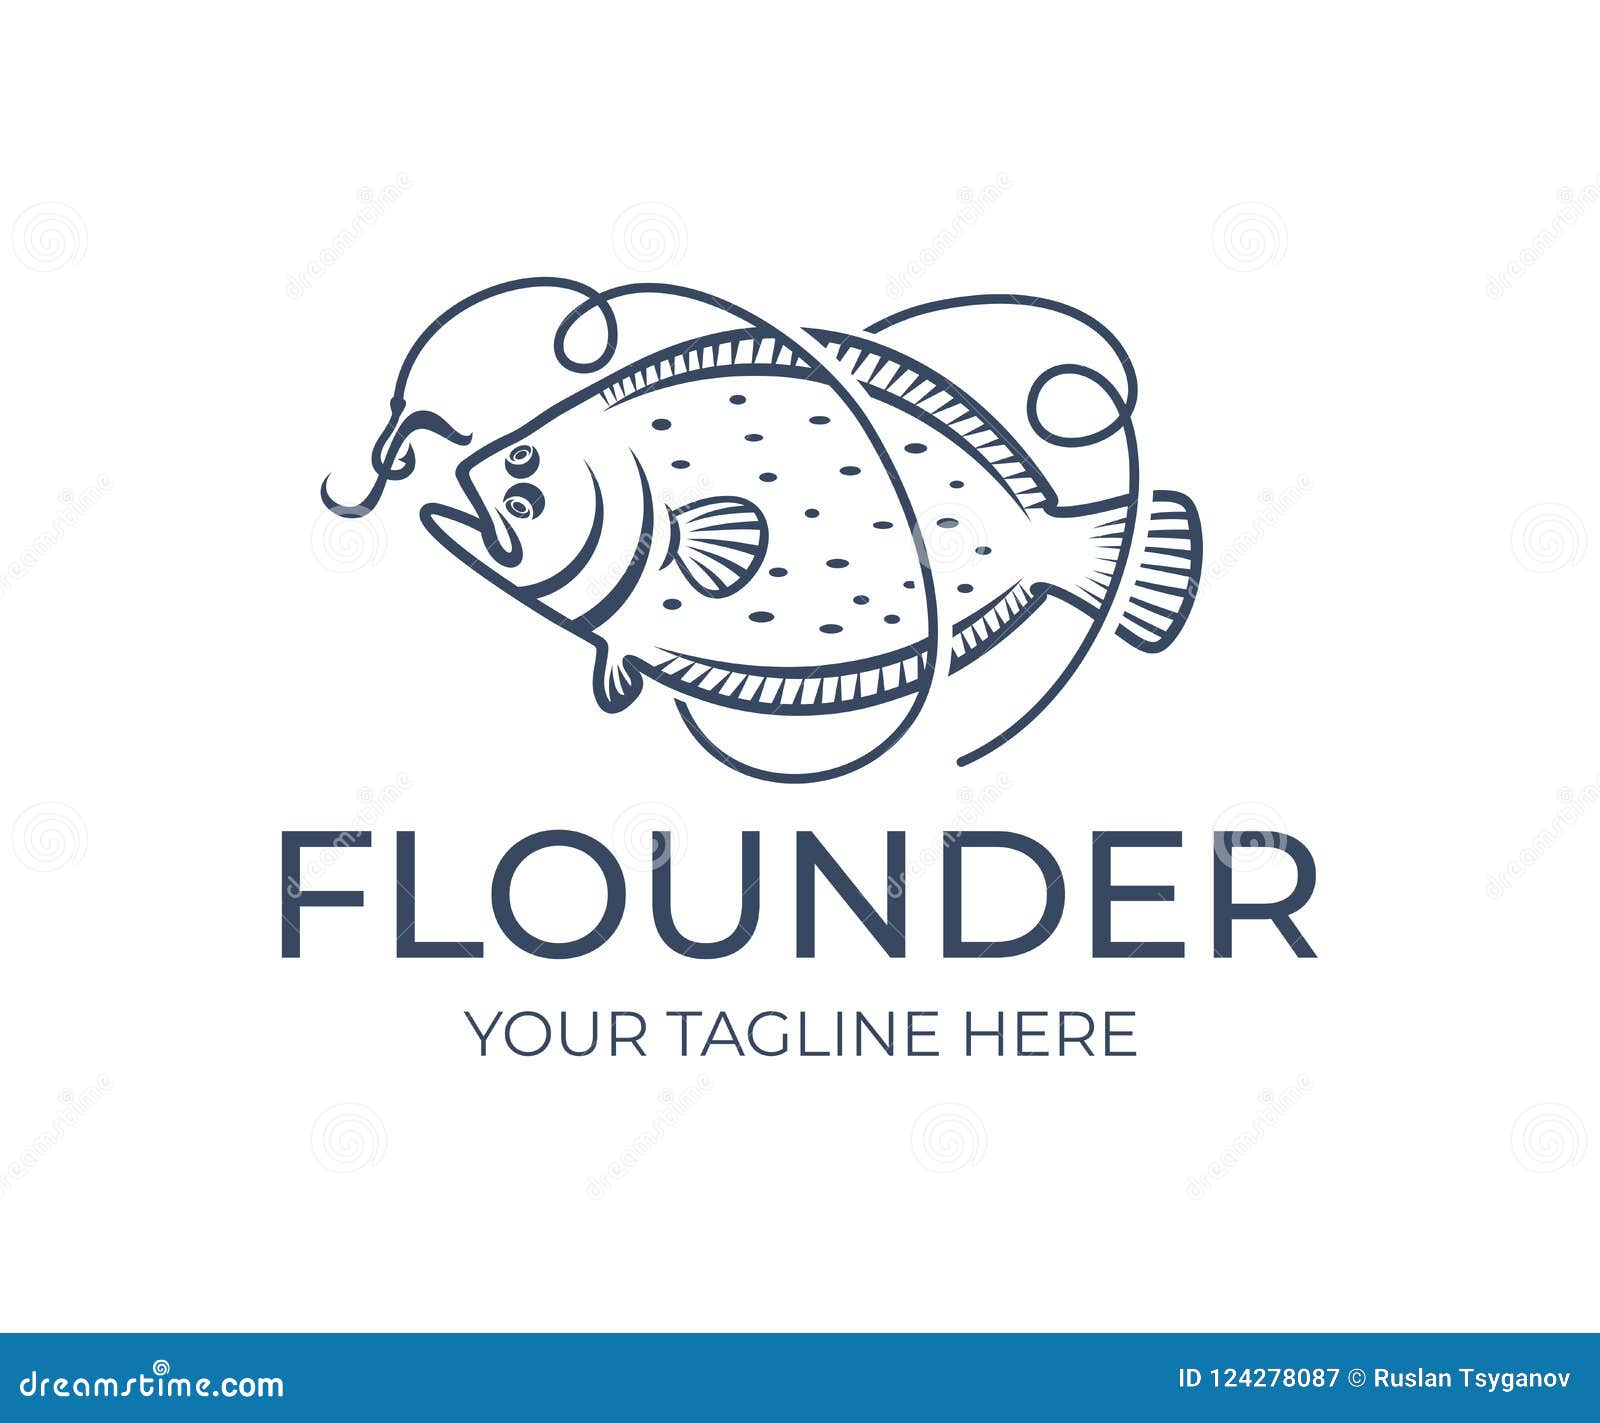 fishing and fish, flounder grabs bait on hook and line, logo . seafood, food, angling on nature,  